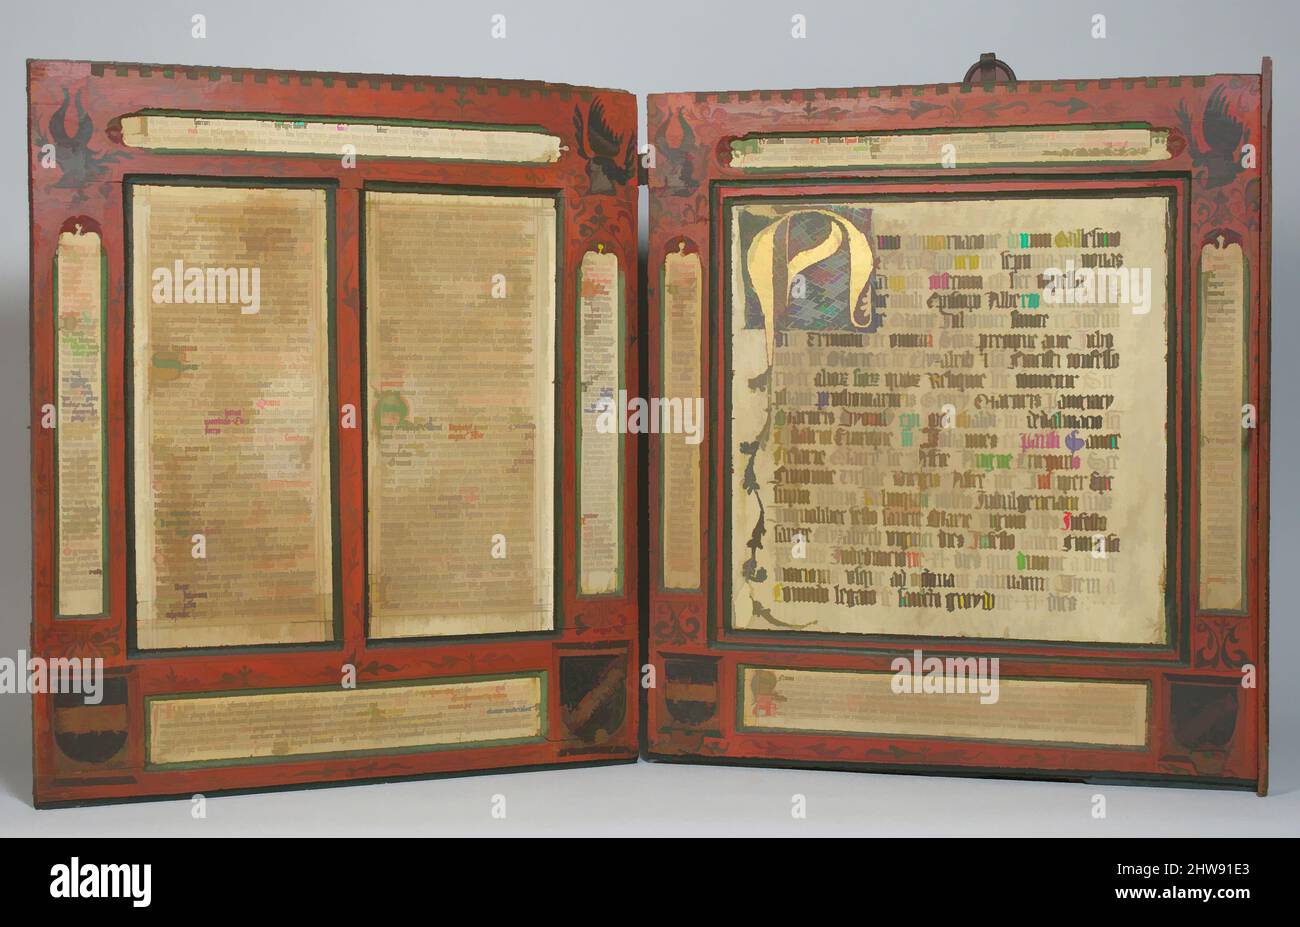 Art inspired by Devotional Diptych with inset Manuscript Texts, 15th century, Austrian, Polychromed wood, ink and pigment on paper and parchment, 28 3/4 x 25 3/8 in. (73 x 64.5 cm), Miscellaneous-Paper, Classic works modernized by Artotop with a splash of modernity. Shapes, color and value, eye-catching visual impact on art. Emotions through freedom of artworks in a contemporary way. A timeless message pursuing a wildly creative new direction. Artists turning to the digital medium and creating the Artotop NFT Stock Photo